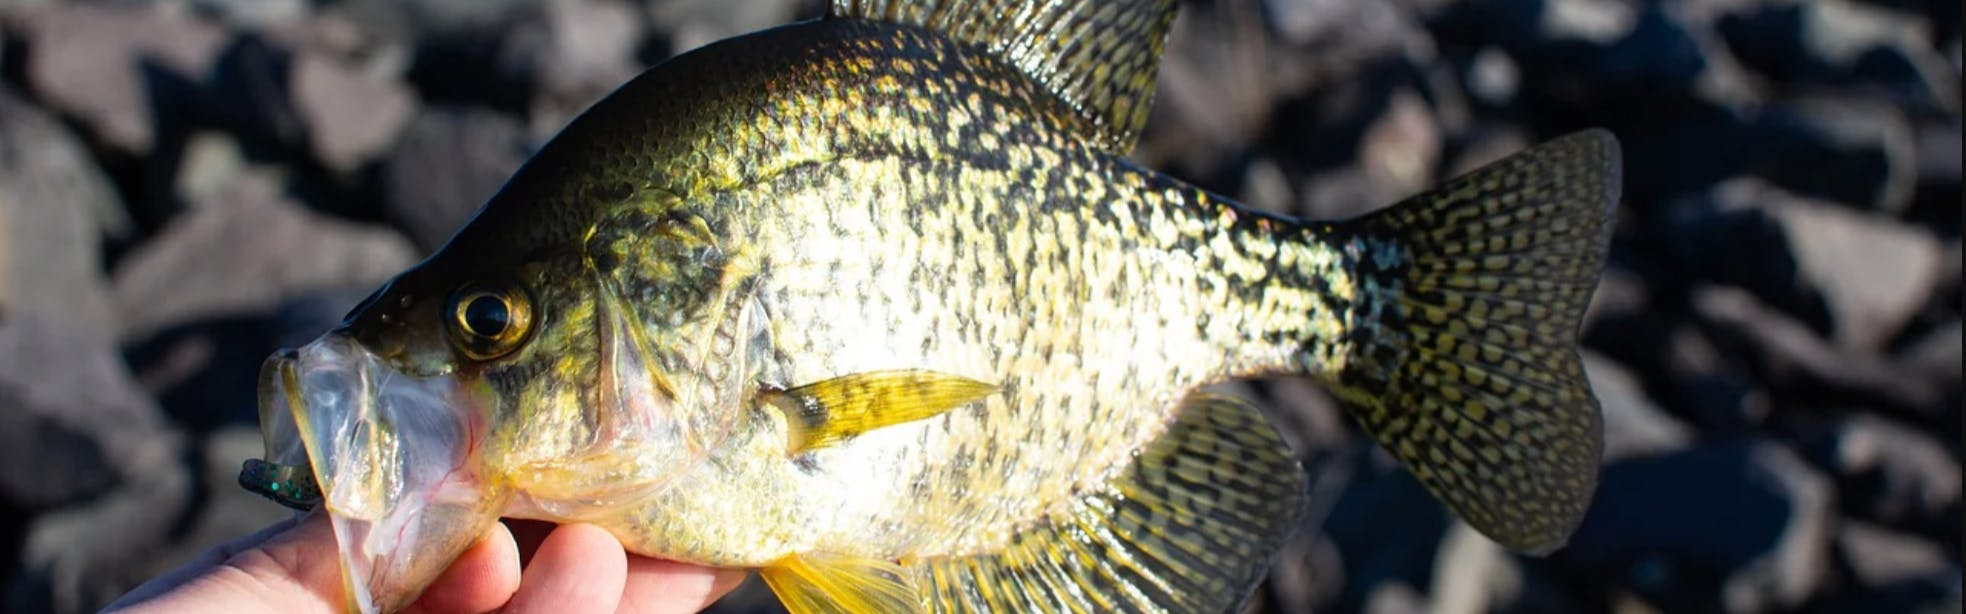 Crappie Fishing: Top Five Most Effective Crappie Rigs, 56% OFF